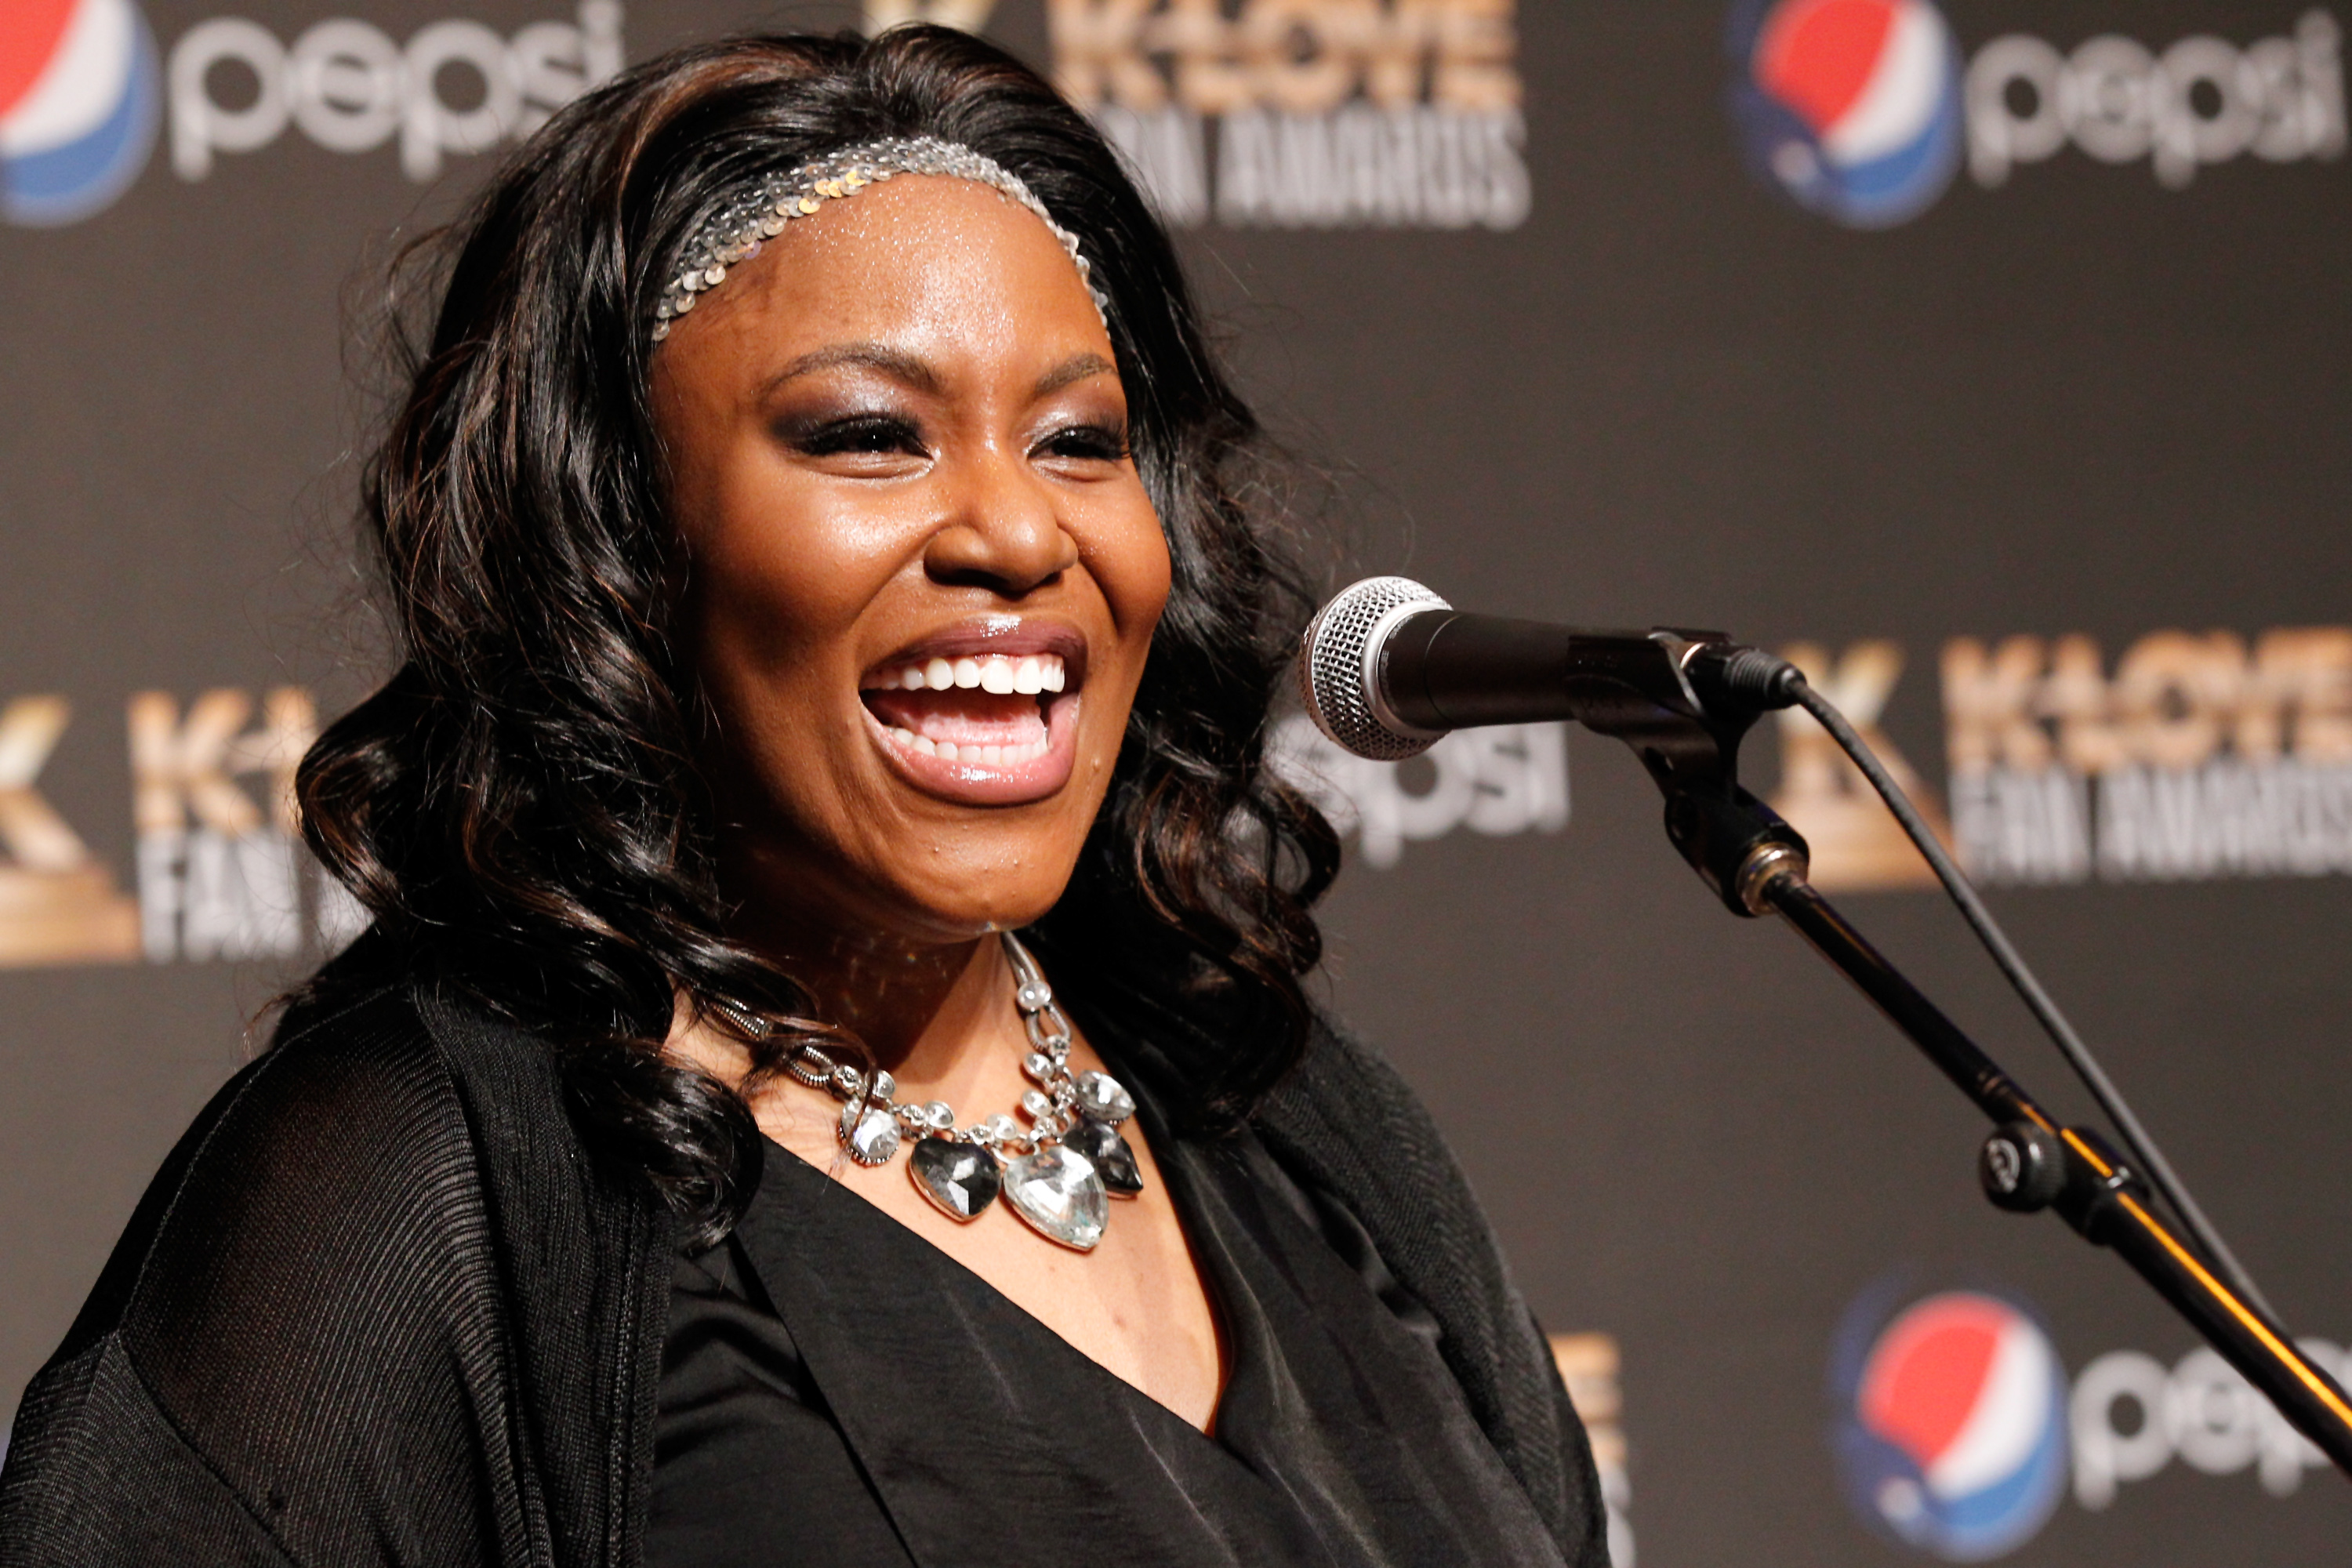 Mandisa at an event in Nashville, Tennessee on June 1, 2014 | Source: Getty Images